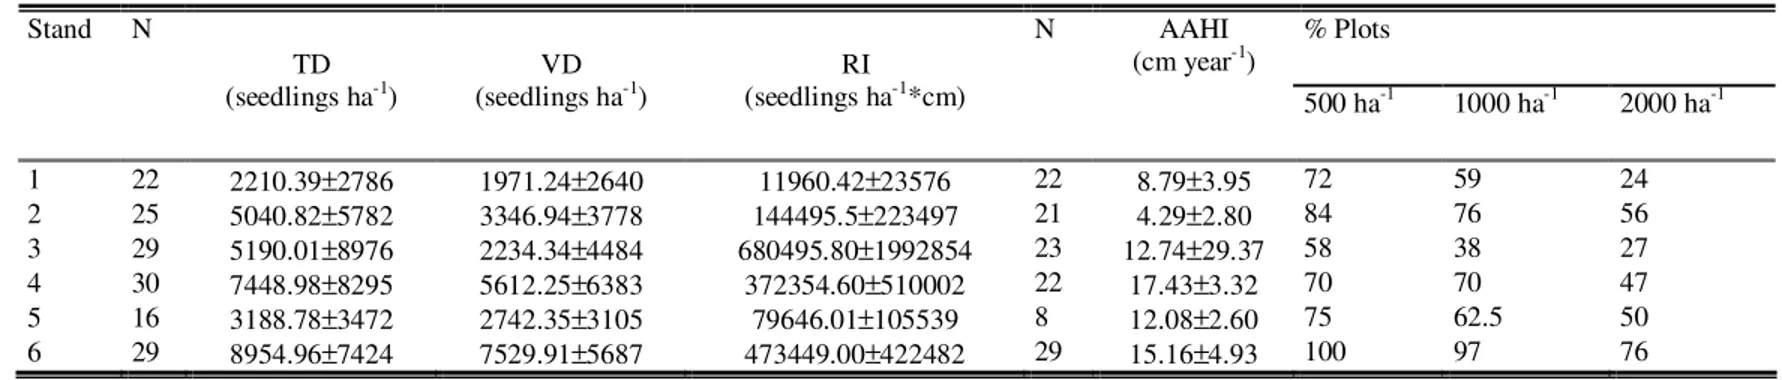 Table 2 . Total (TD) and viable (VD) seedling density, regeneration index (RI), annual average height increment (AAHI), and percentage of plots per stand with 500 viable 